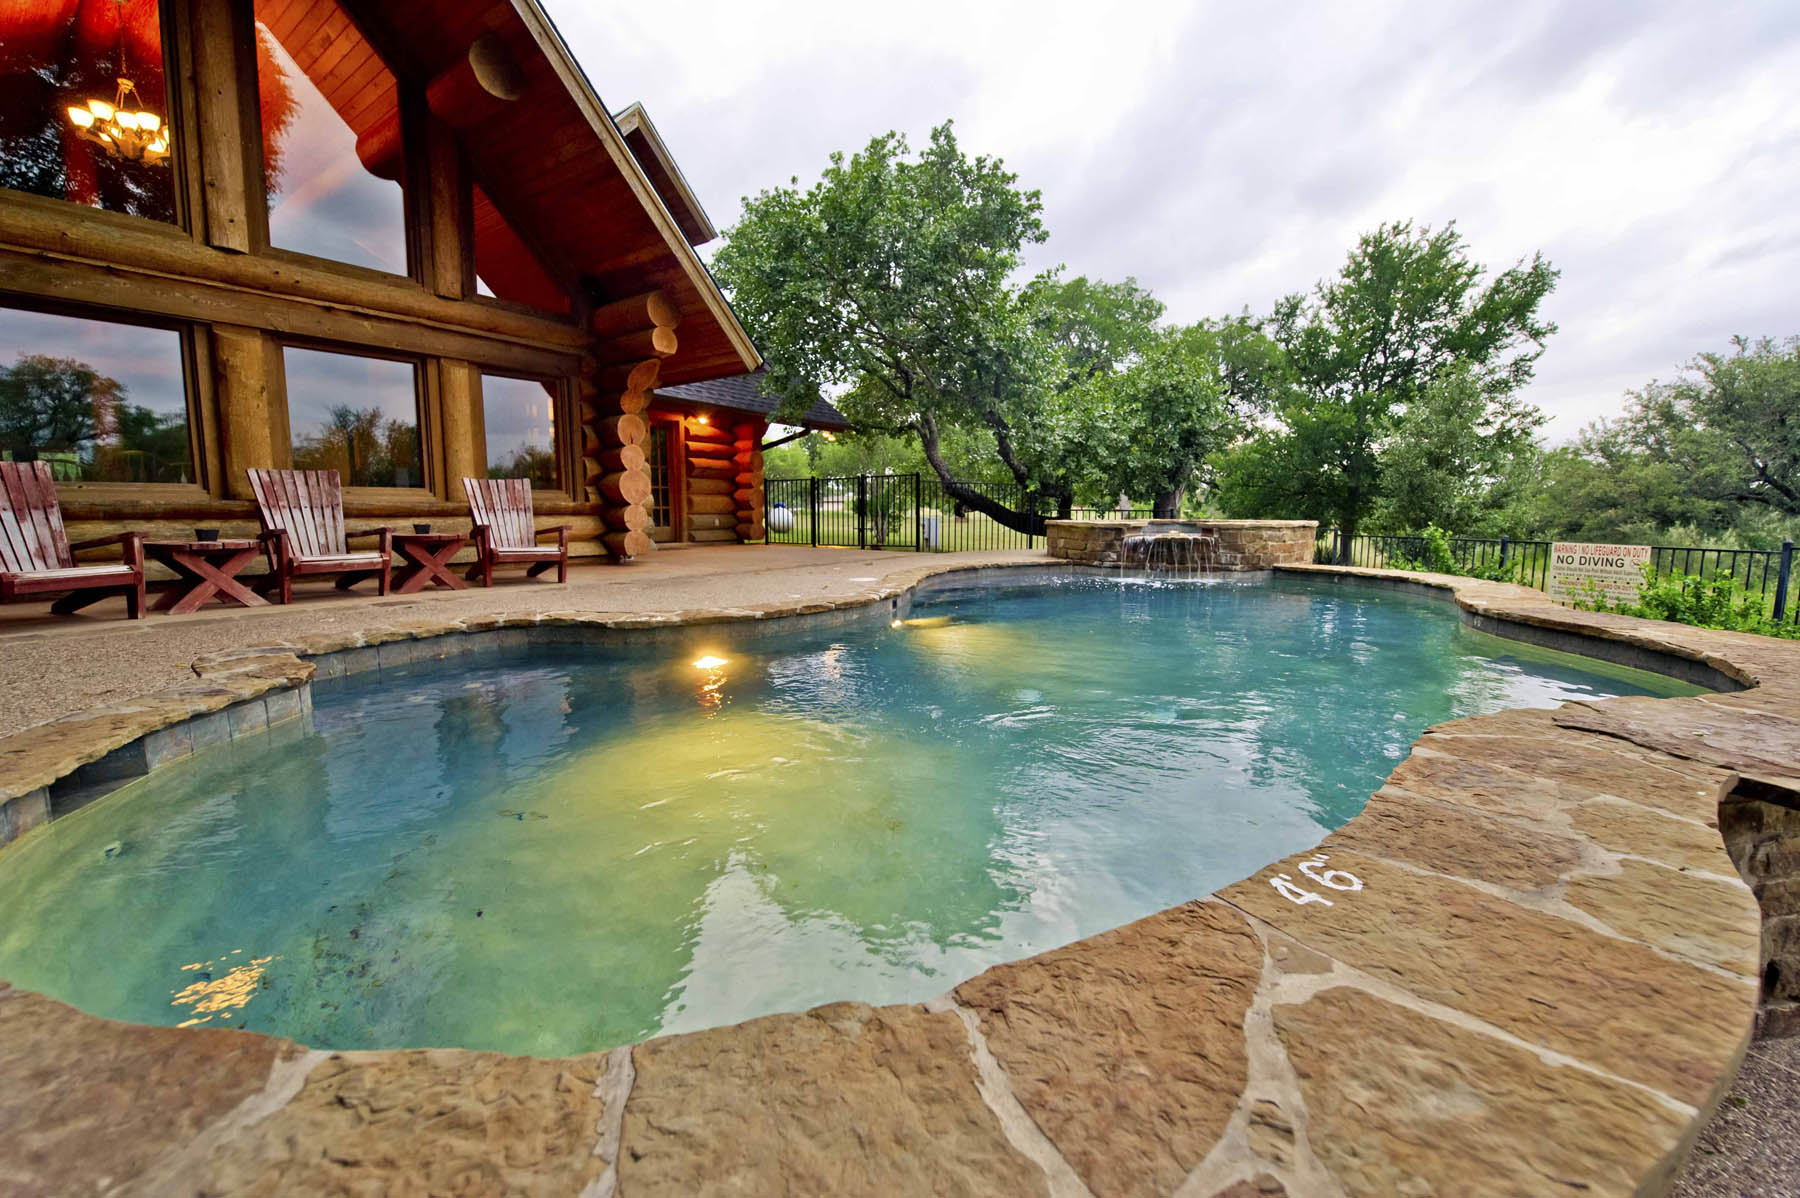 Cabin exterior, outdoor pool, hot tub.